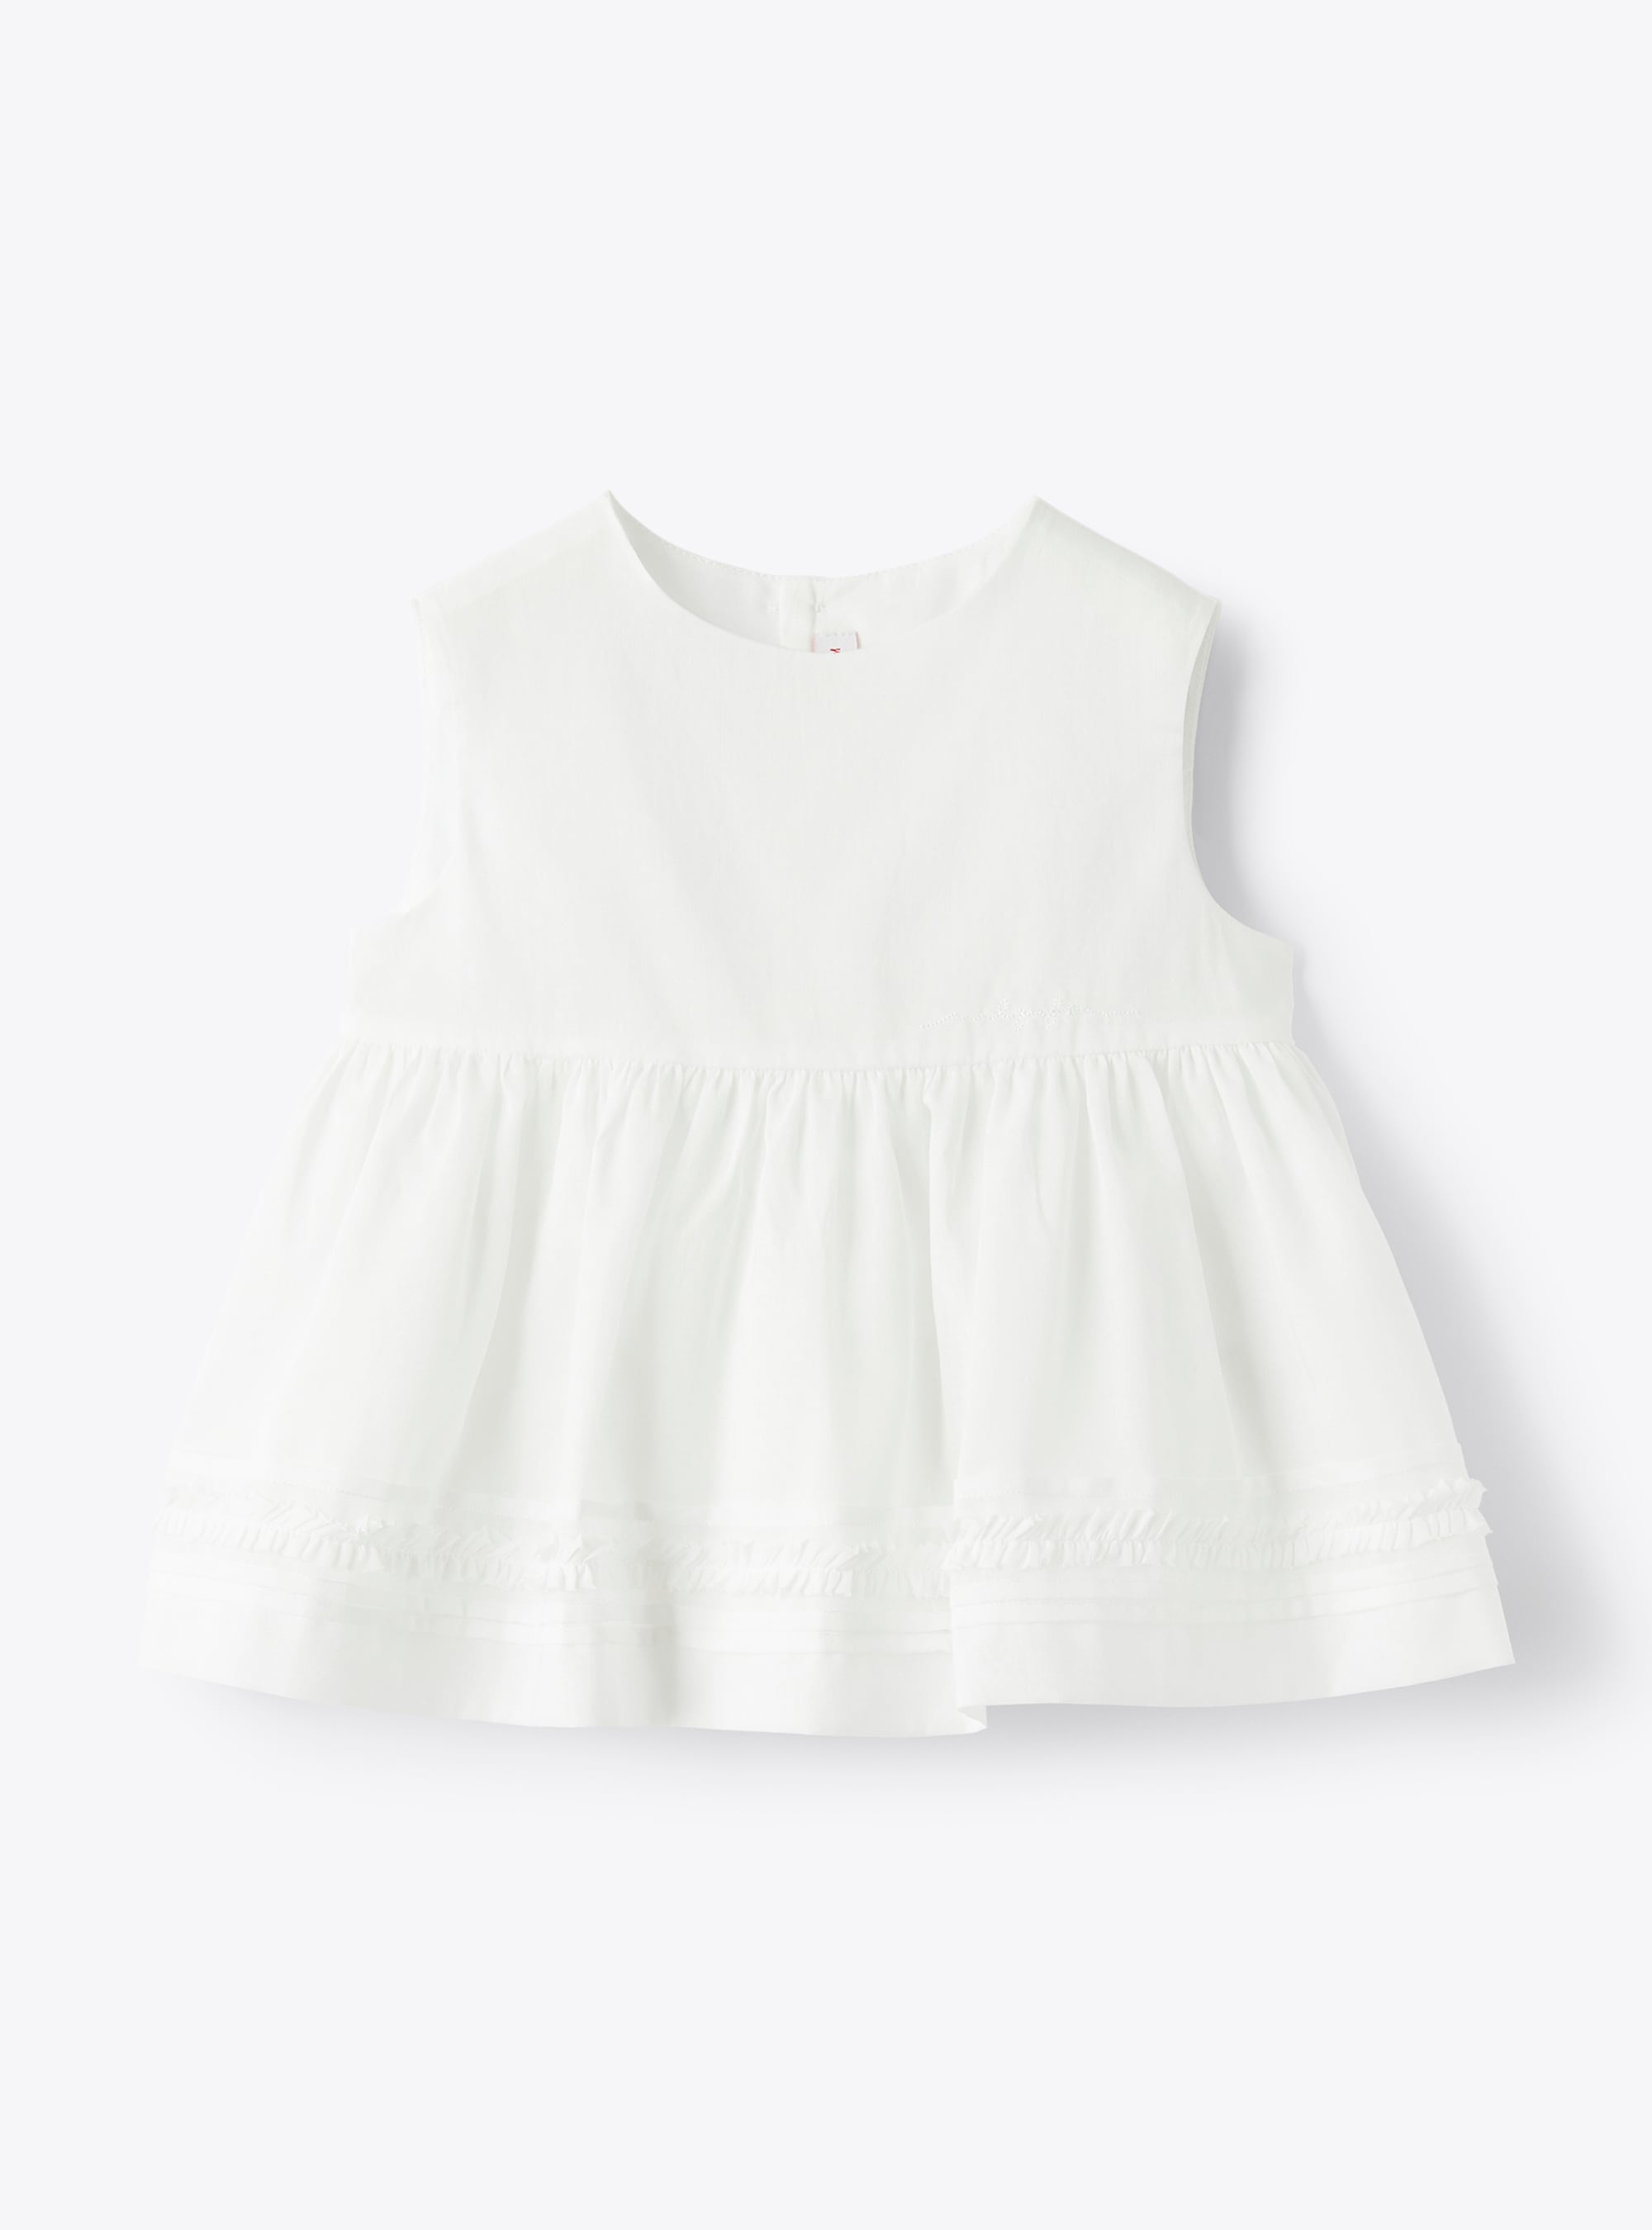 Sleeveless top in white cotton voile - T-shirts - Il Gufo